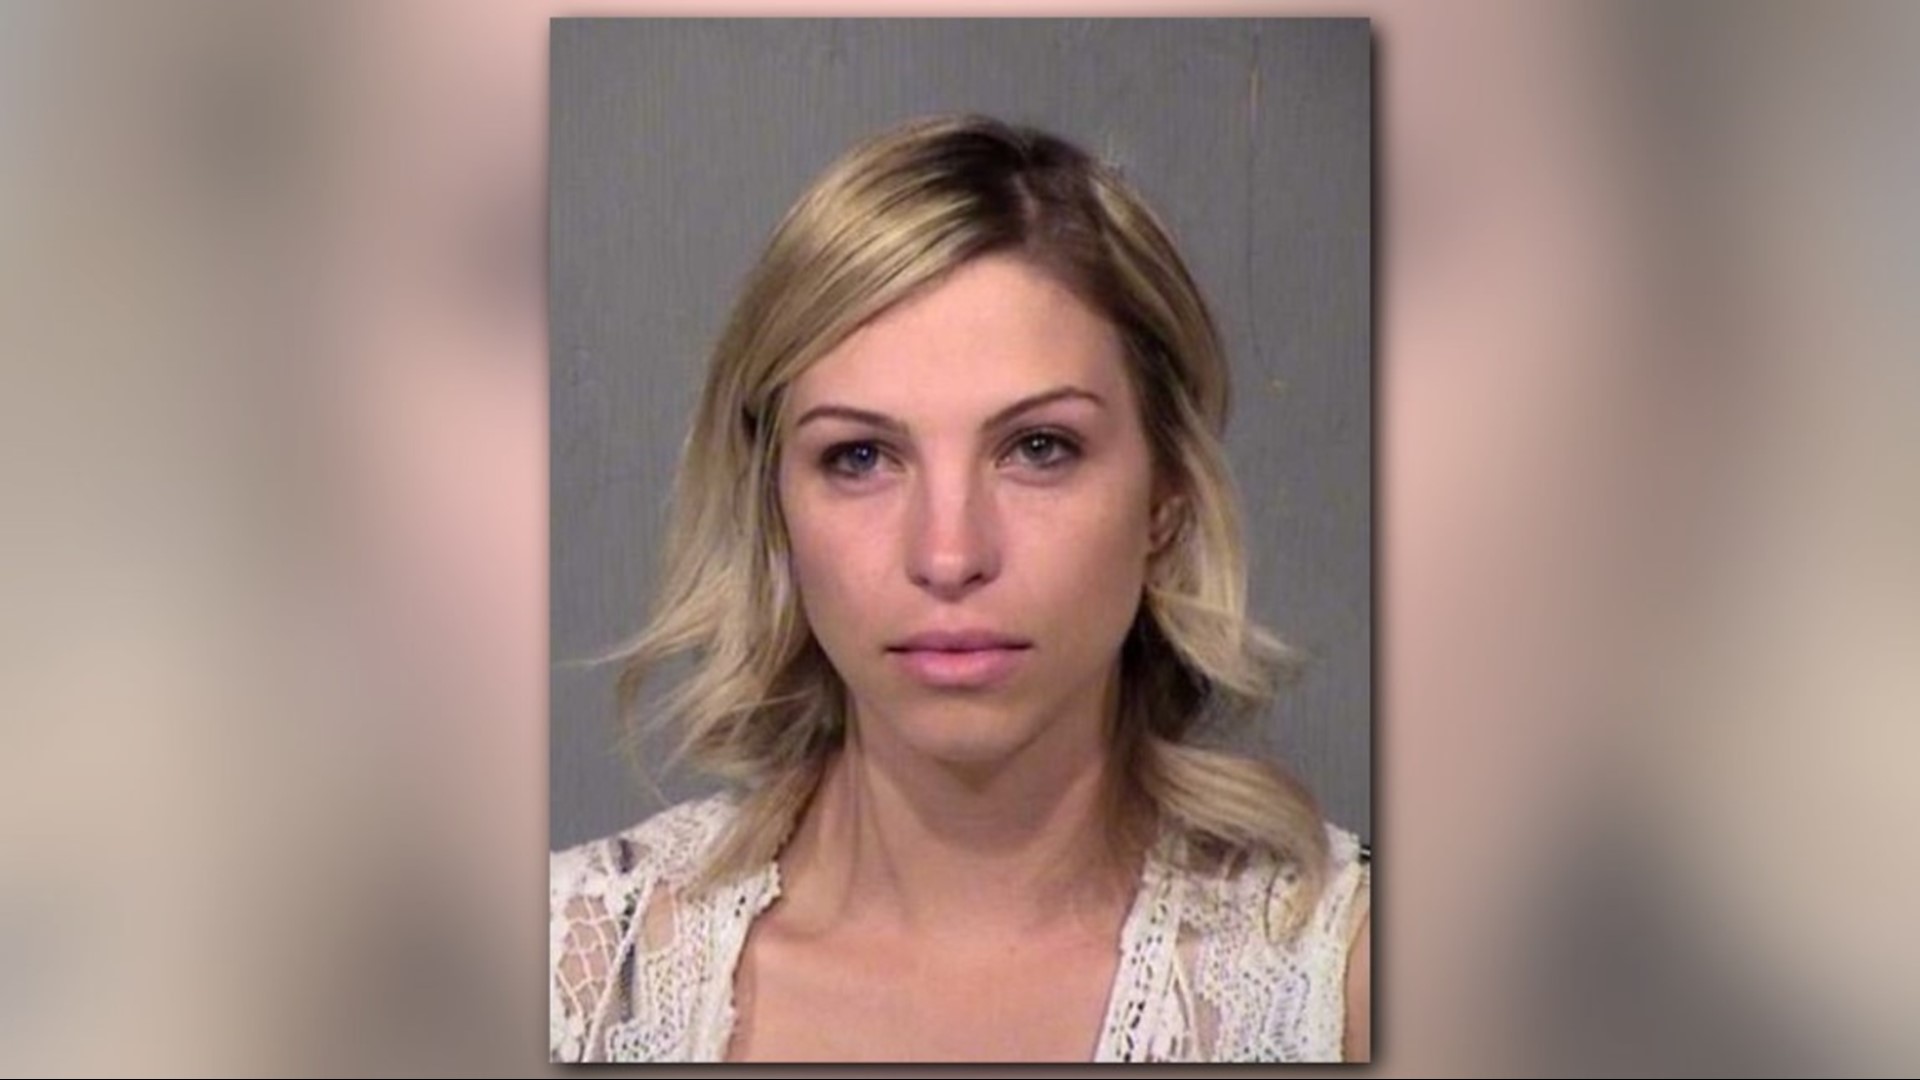 Brittany Zamora, a former Goodyear teacher, is accused of having sex with one of her 13-year-old students. Zamora was in court today where a motion was filed to delay the trial and set a plea deal for some time in June.